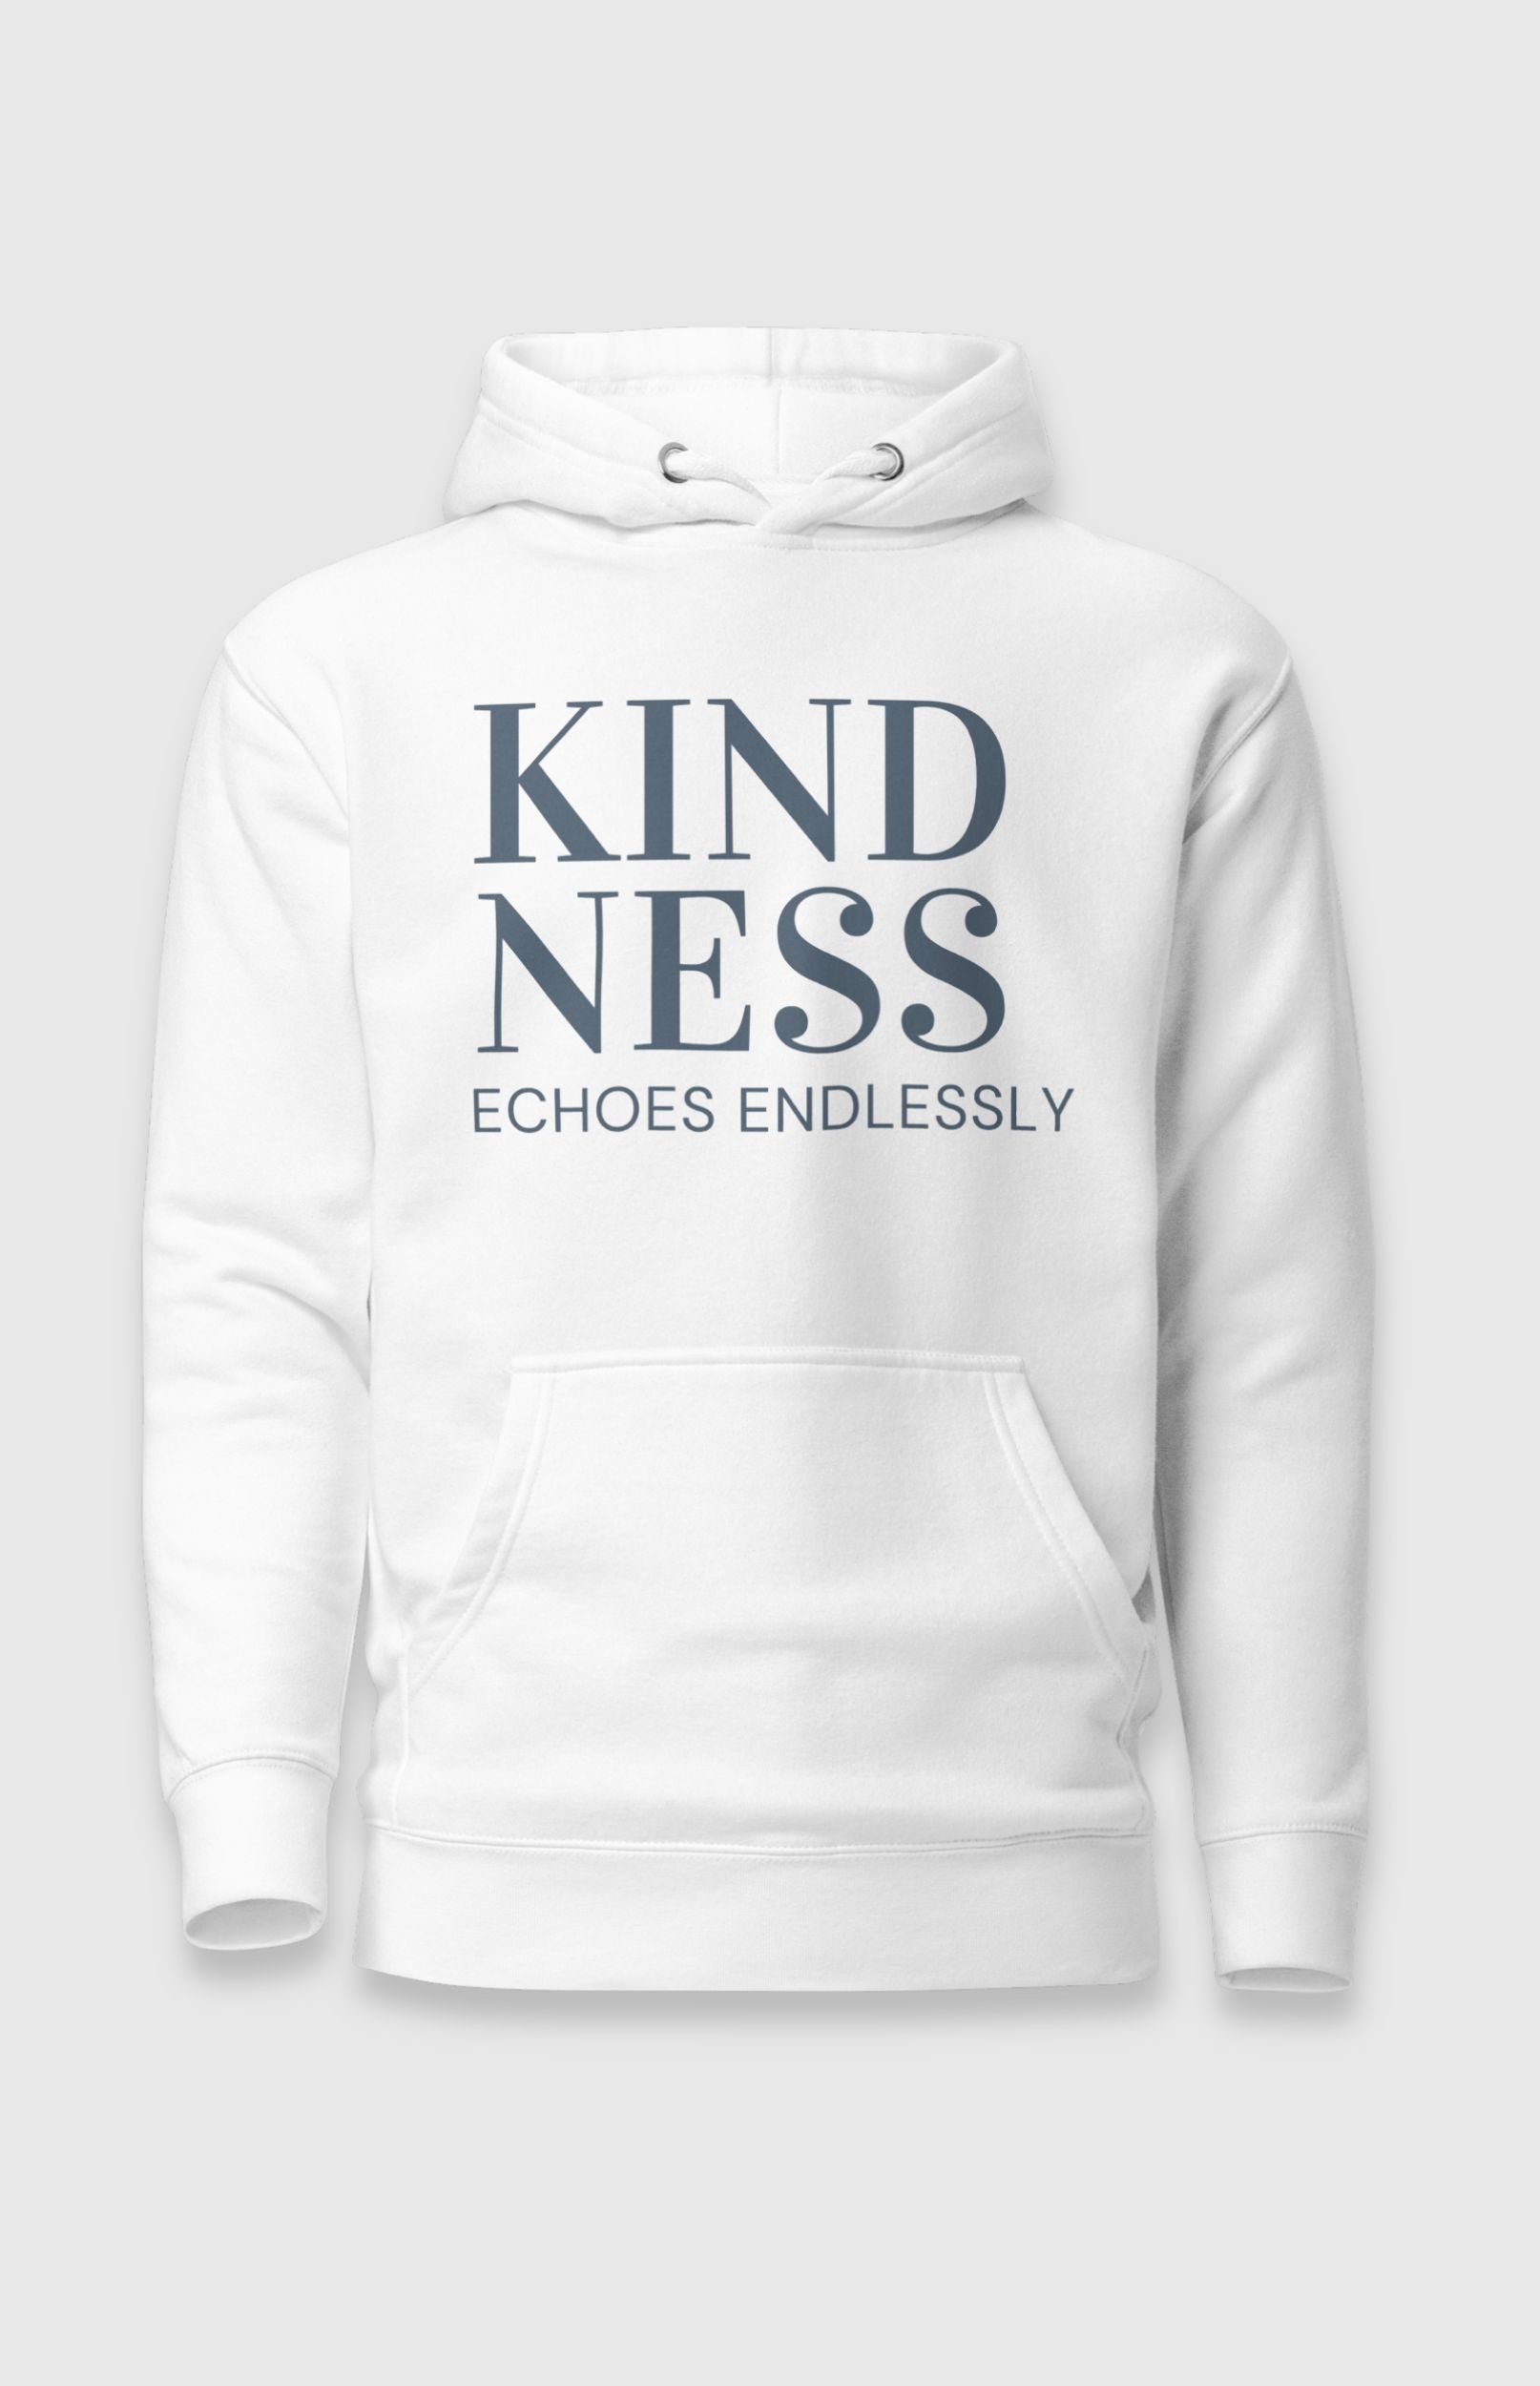 Driven Values Echoes – Kindness Hoodie